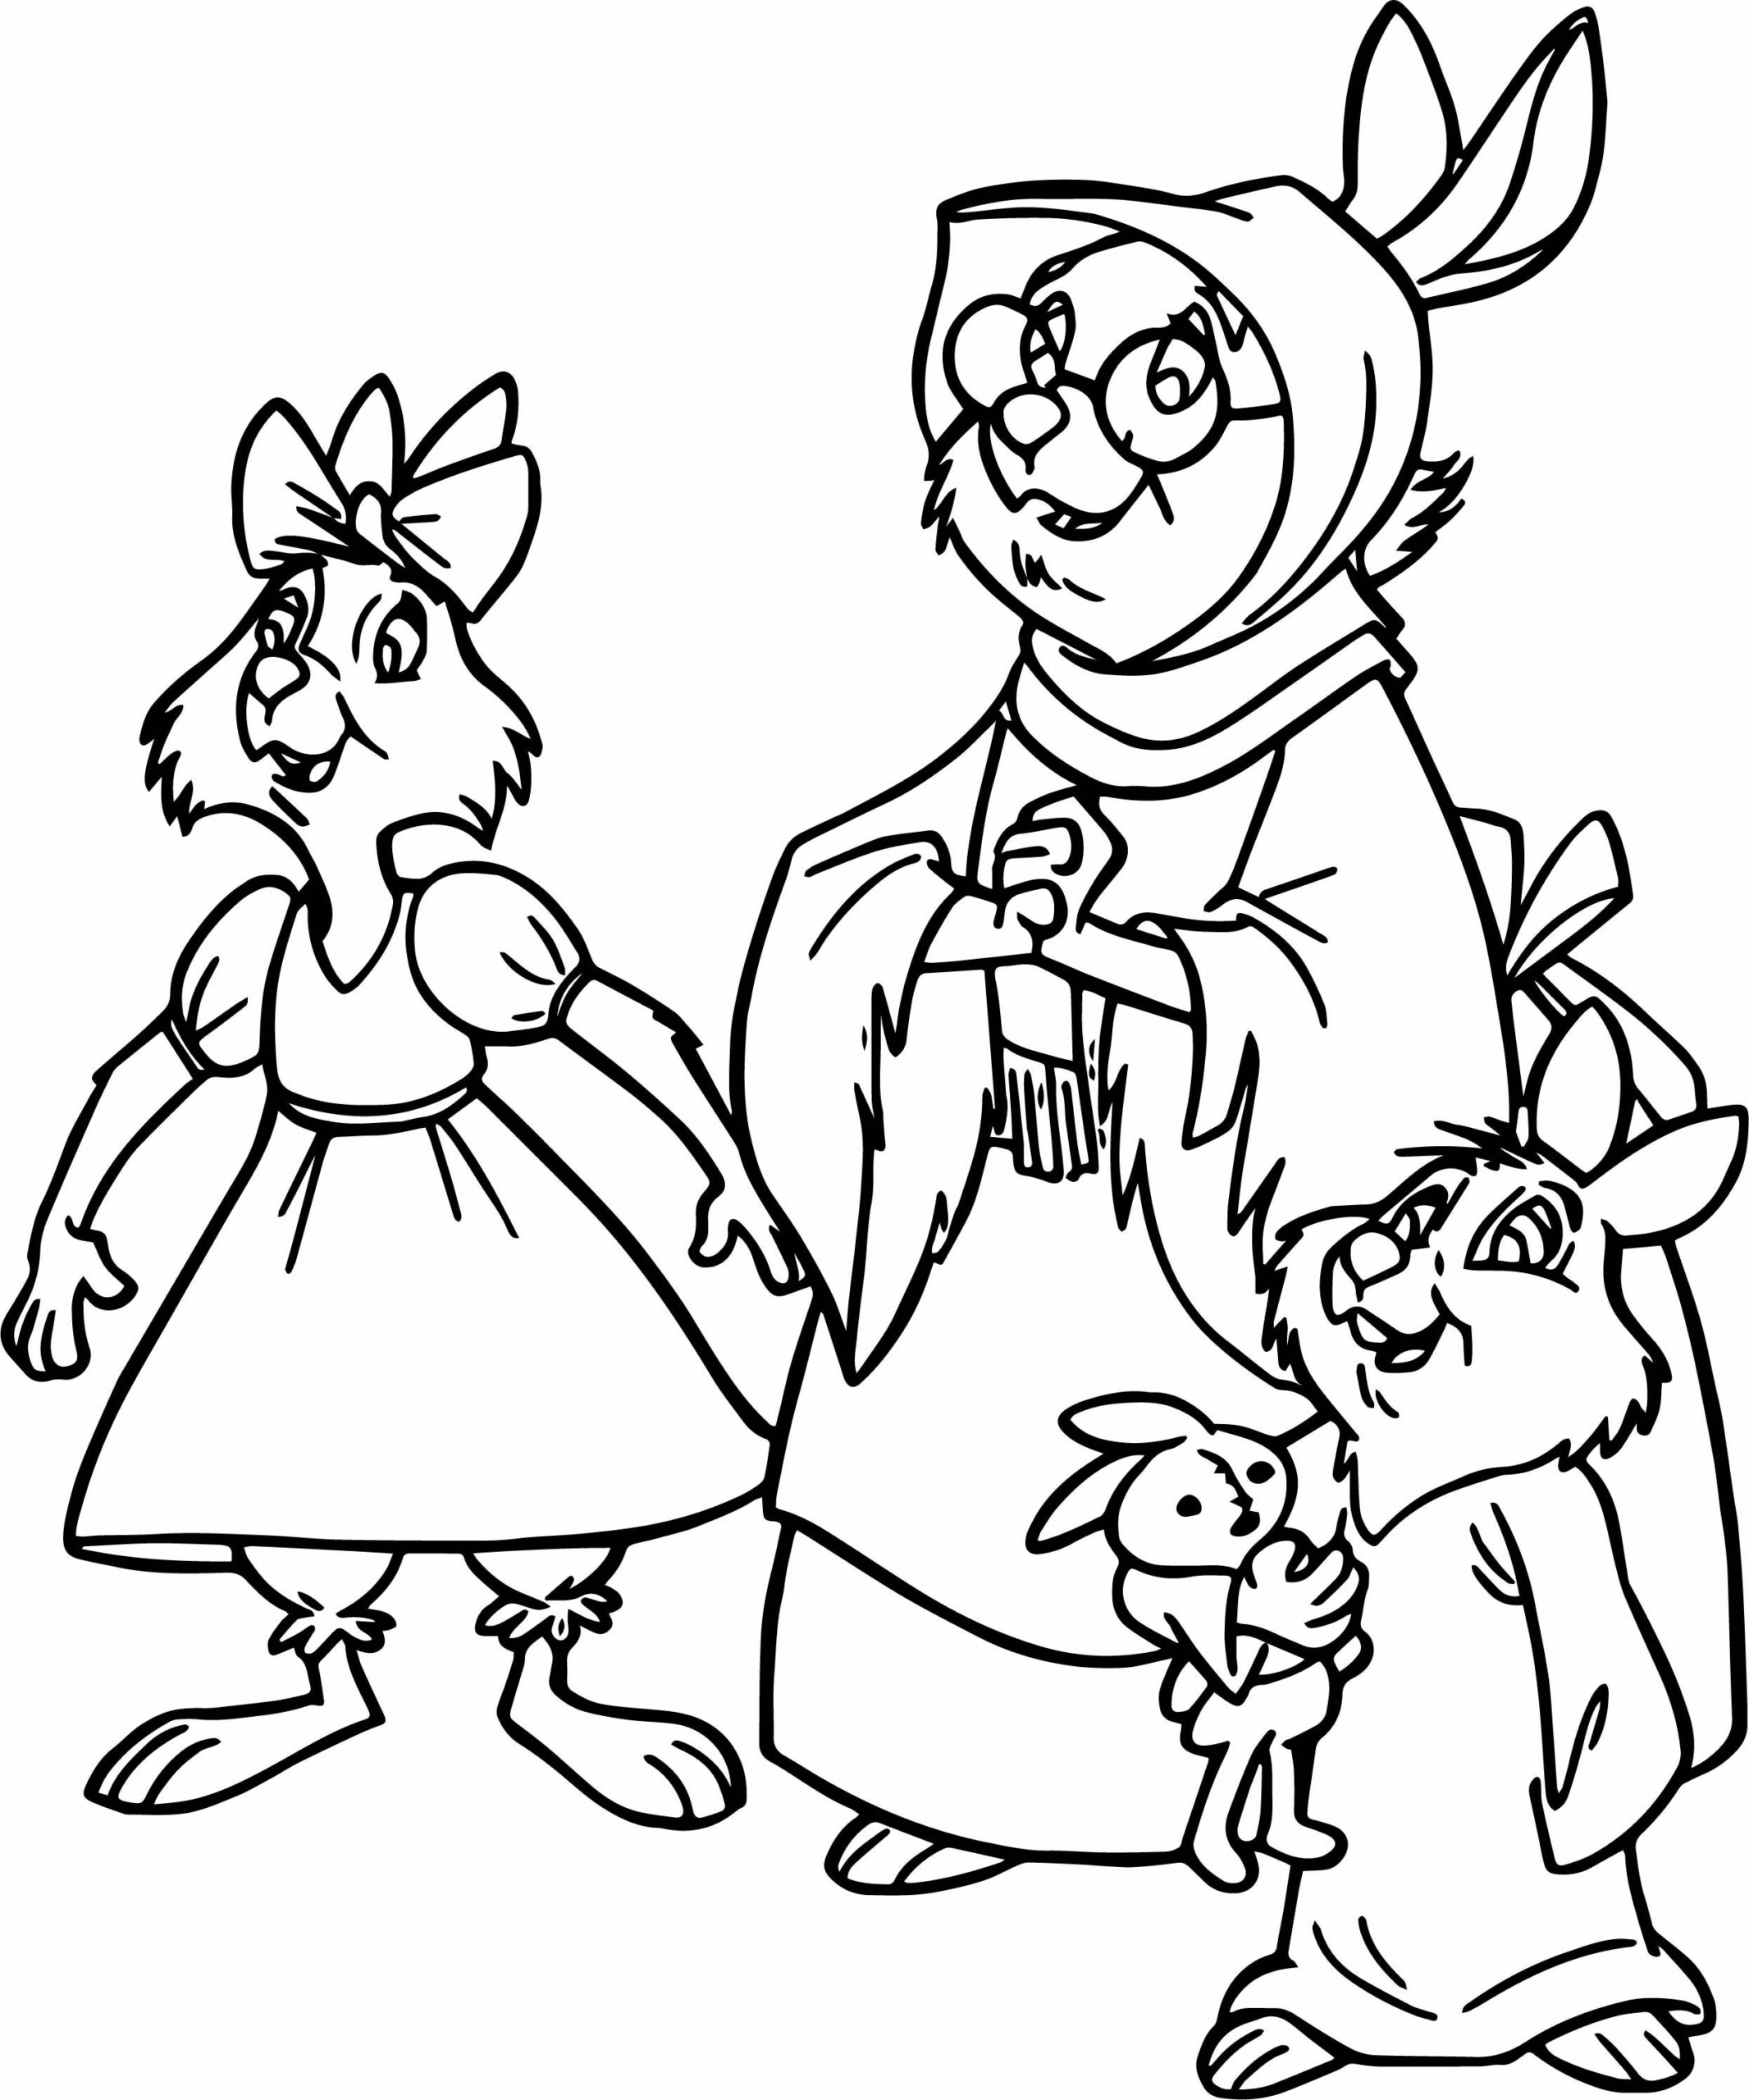 lds family coloring pages